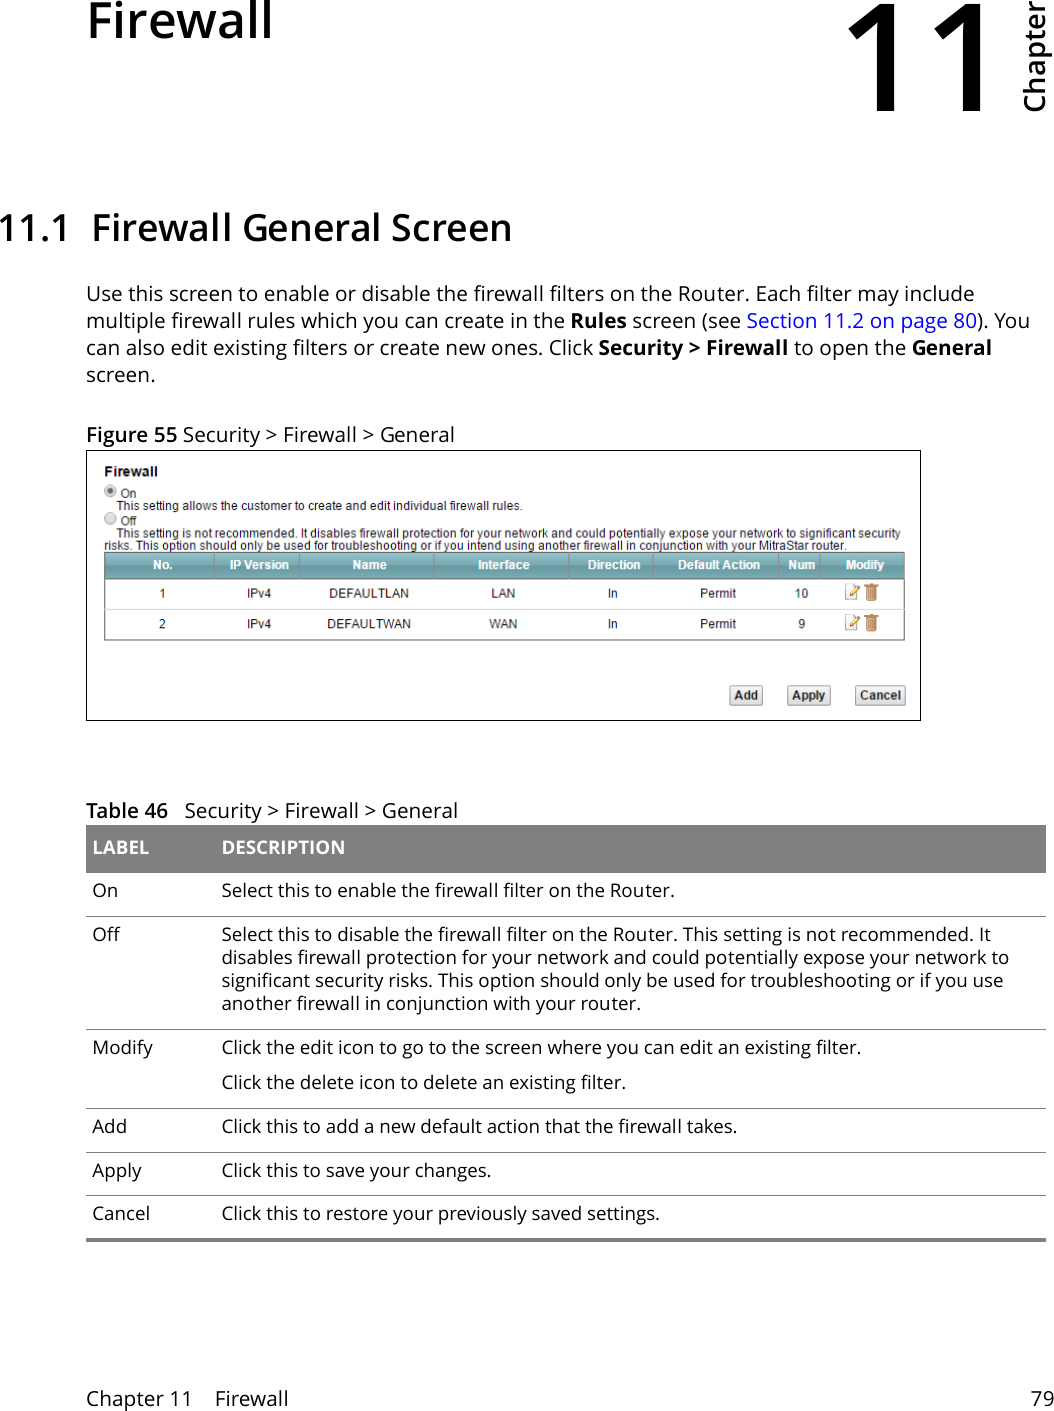 11Chapter Chapter 11    Firewall 79CHAPTER 11 Chapter 11 Firewall11.1  Firewall General ScreenUse this screen to enable or disable the firewall filters on the Router. Each filter may include multiple firewall rules which you can create in the Rules screen (see Section 11.2 on page 80). You can also edit existing filters or create new ones. Click Security &gt; Firewall to open the General screen.Figure 55 Security &gt; Firewall &gt; GeneralTable 46   Security &gt; Firewall &gt; General LABEL DESCRIPTIONOn Select this to enable the firewall filter on the Router. Off Select this to disable the firewall filter on the Router. This setting is not recommended. It disables firewall protection for your network and could potentially expose your network to significant security risks. This option should only be used for troubleshooting or if you use another firewall in conjunction with your router.Modify Click the edit icon to go to the screen where you can edit an existing filter.Click the delete icon to delete an existing filter.Add Click this to add a new default action that the firewall takes.Apply Click this to save your changes.Cancel Click this to restore your previously saved settings.